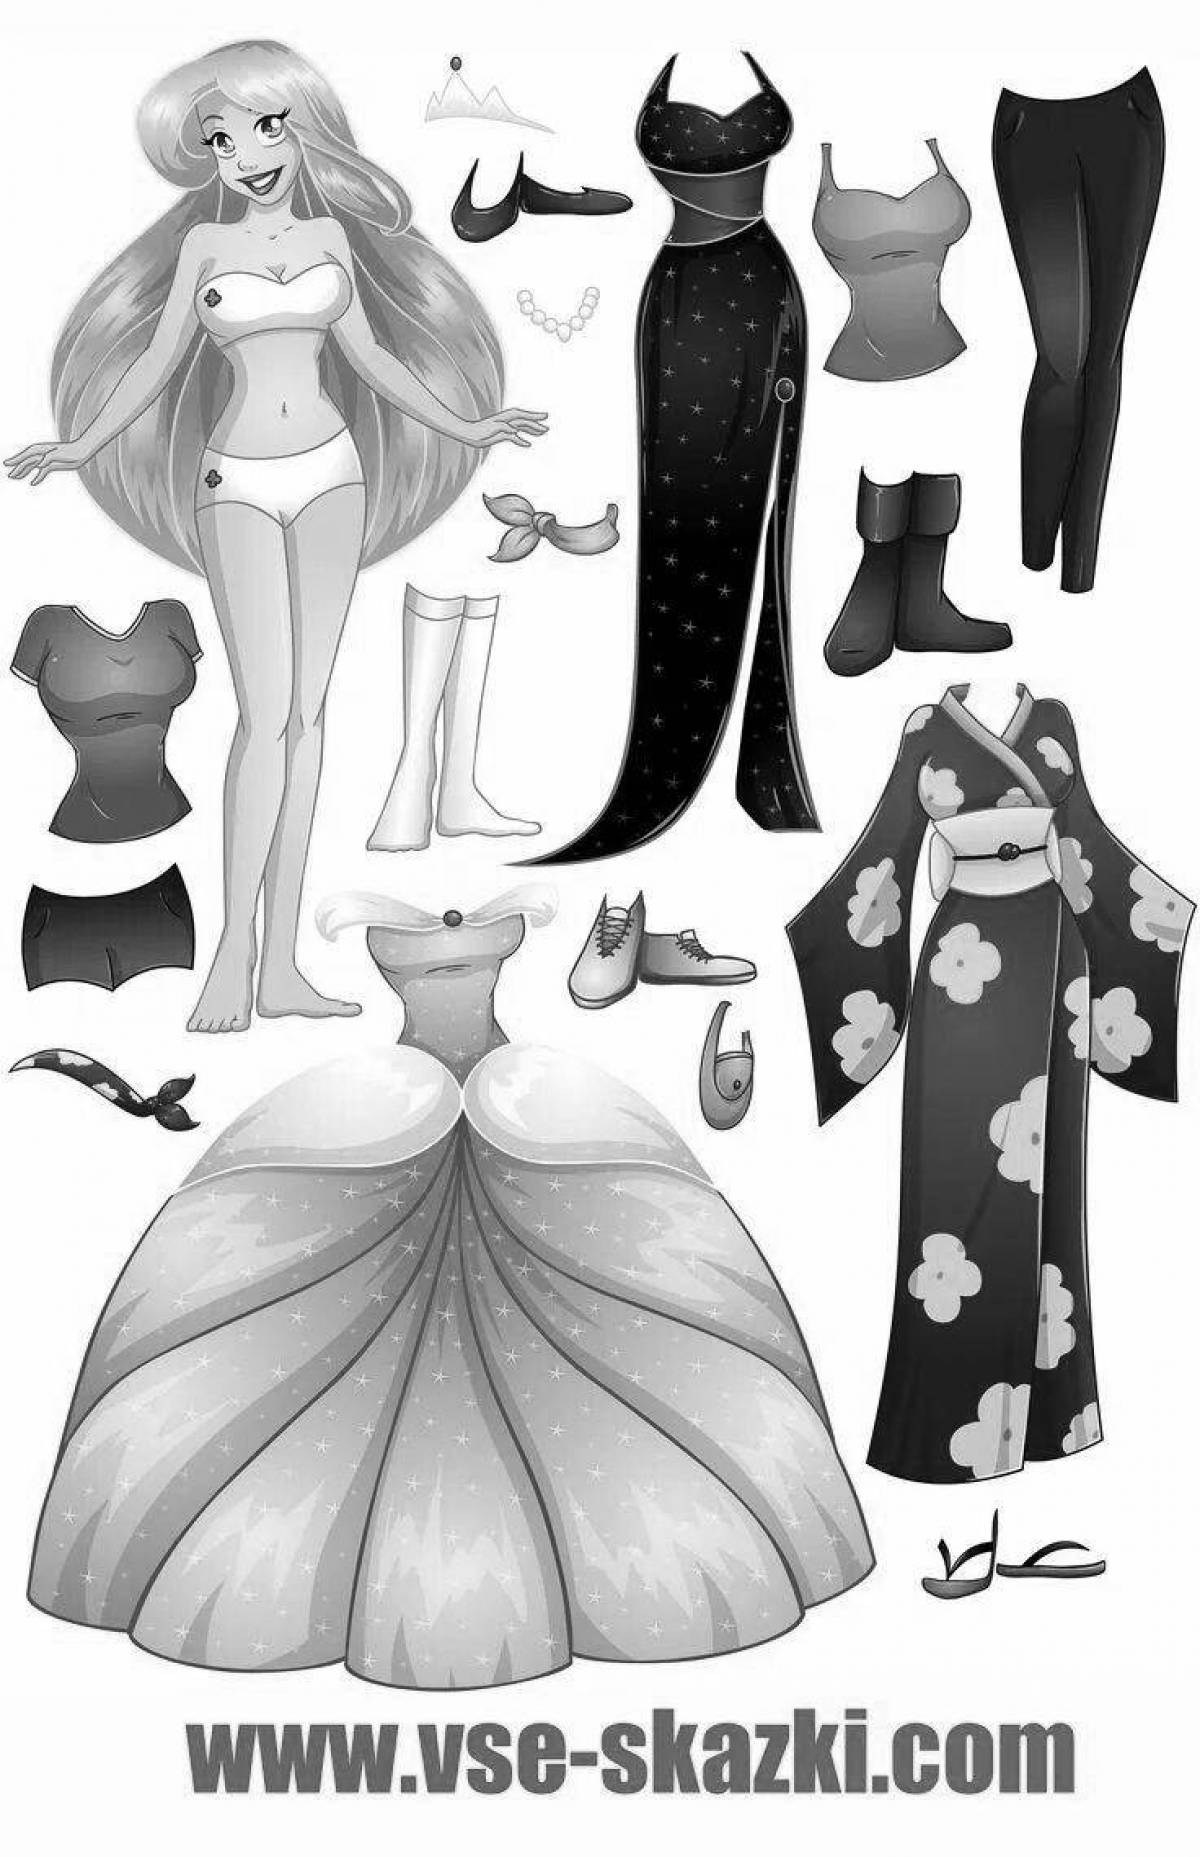 Coloring glitter elsa paper doll with clothes to cut out